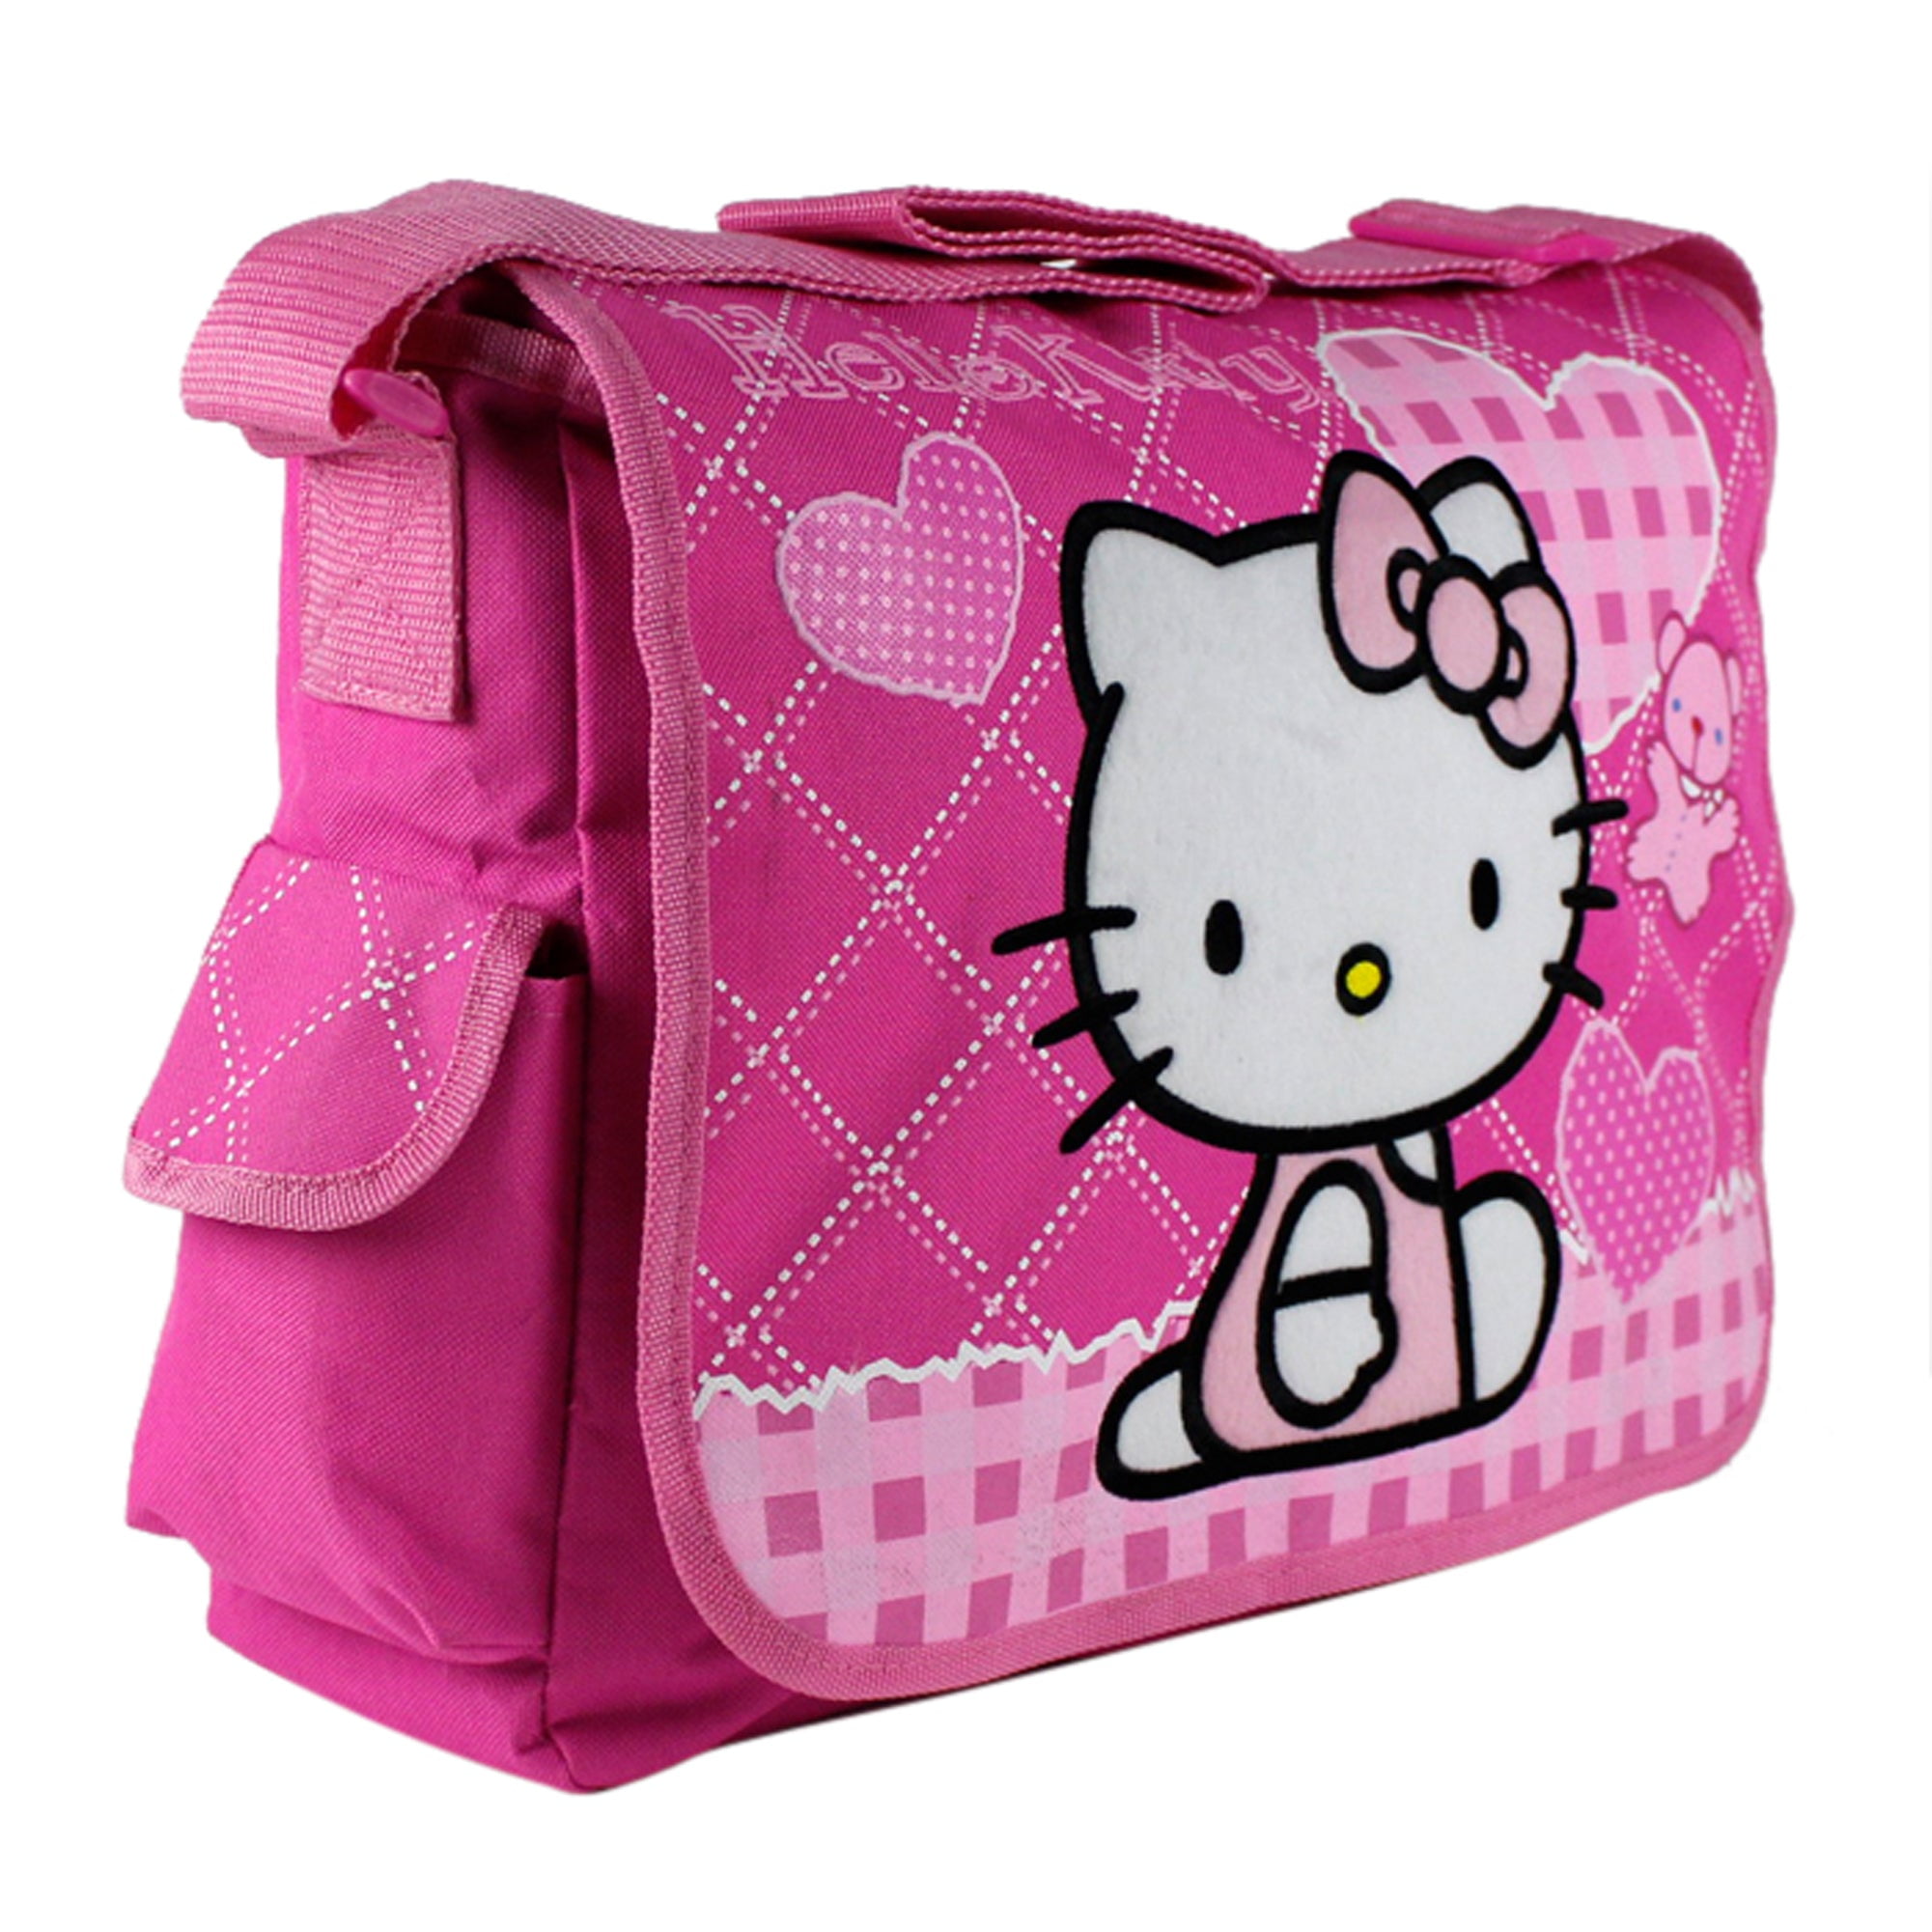 Hello Kitty pink sanrio messenger bag - $59 (70% Off Retail) New With Tags  - From cass